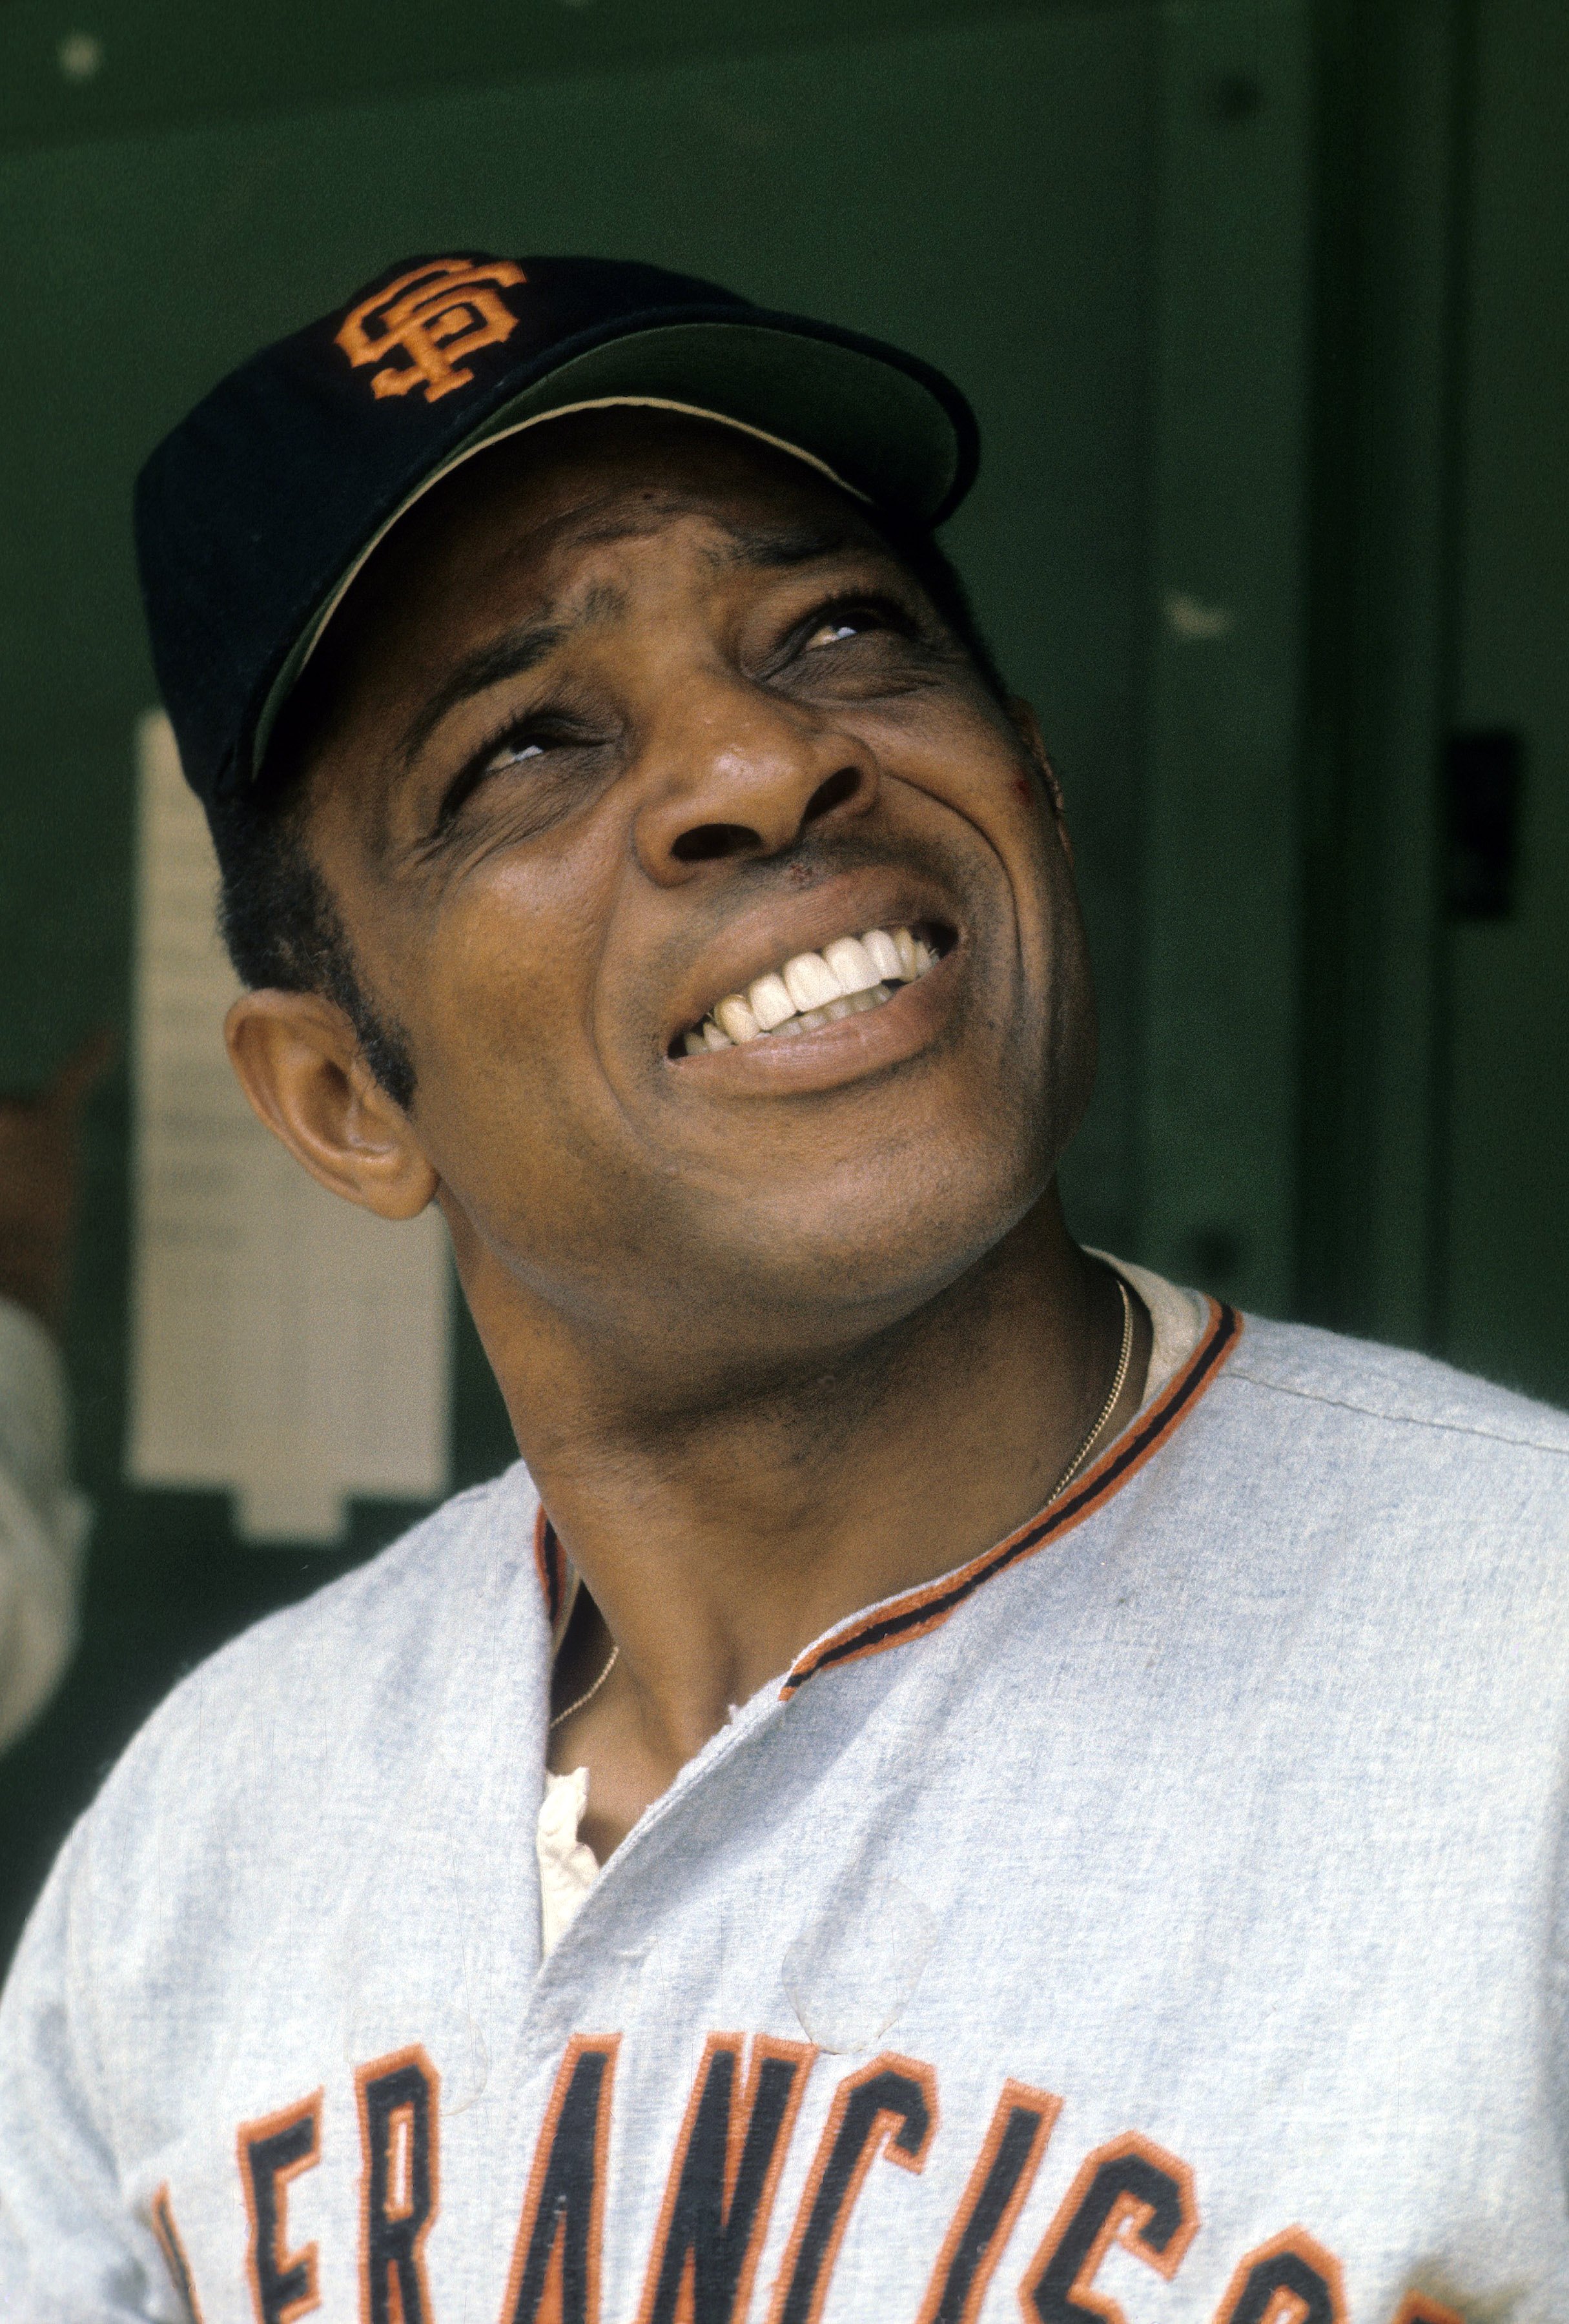 Willie Mays looks up into the stands before a Major League Baseball game in the early 1970s. | Source: Getty Images